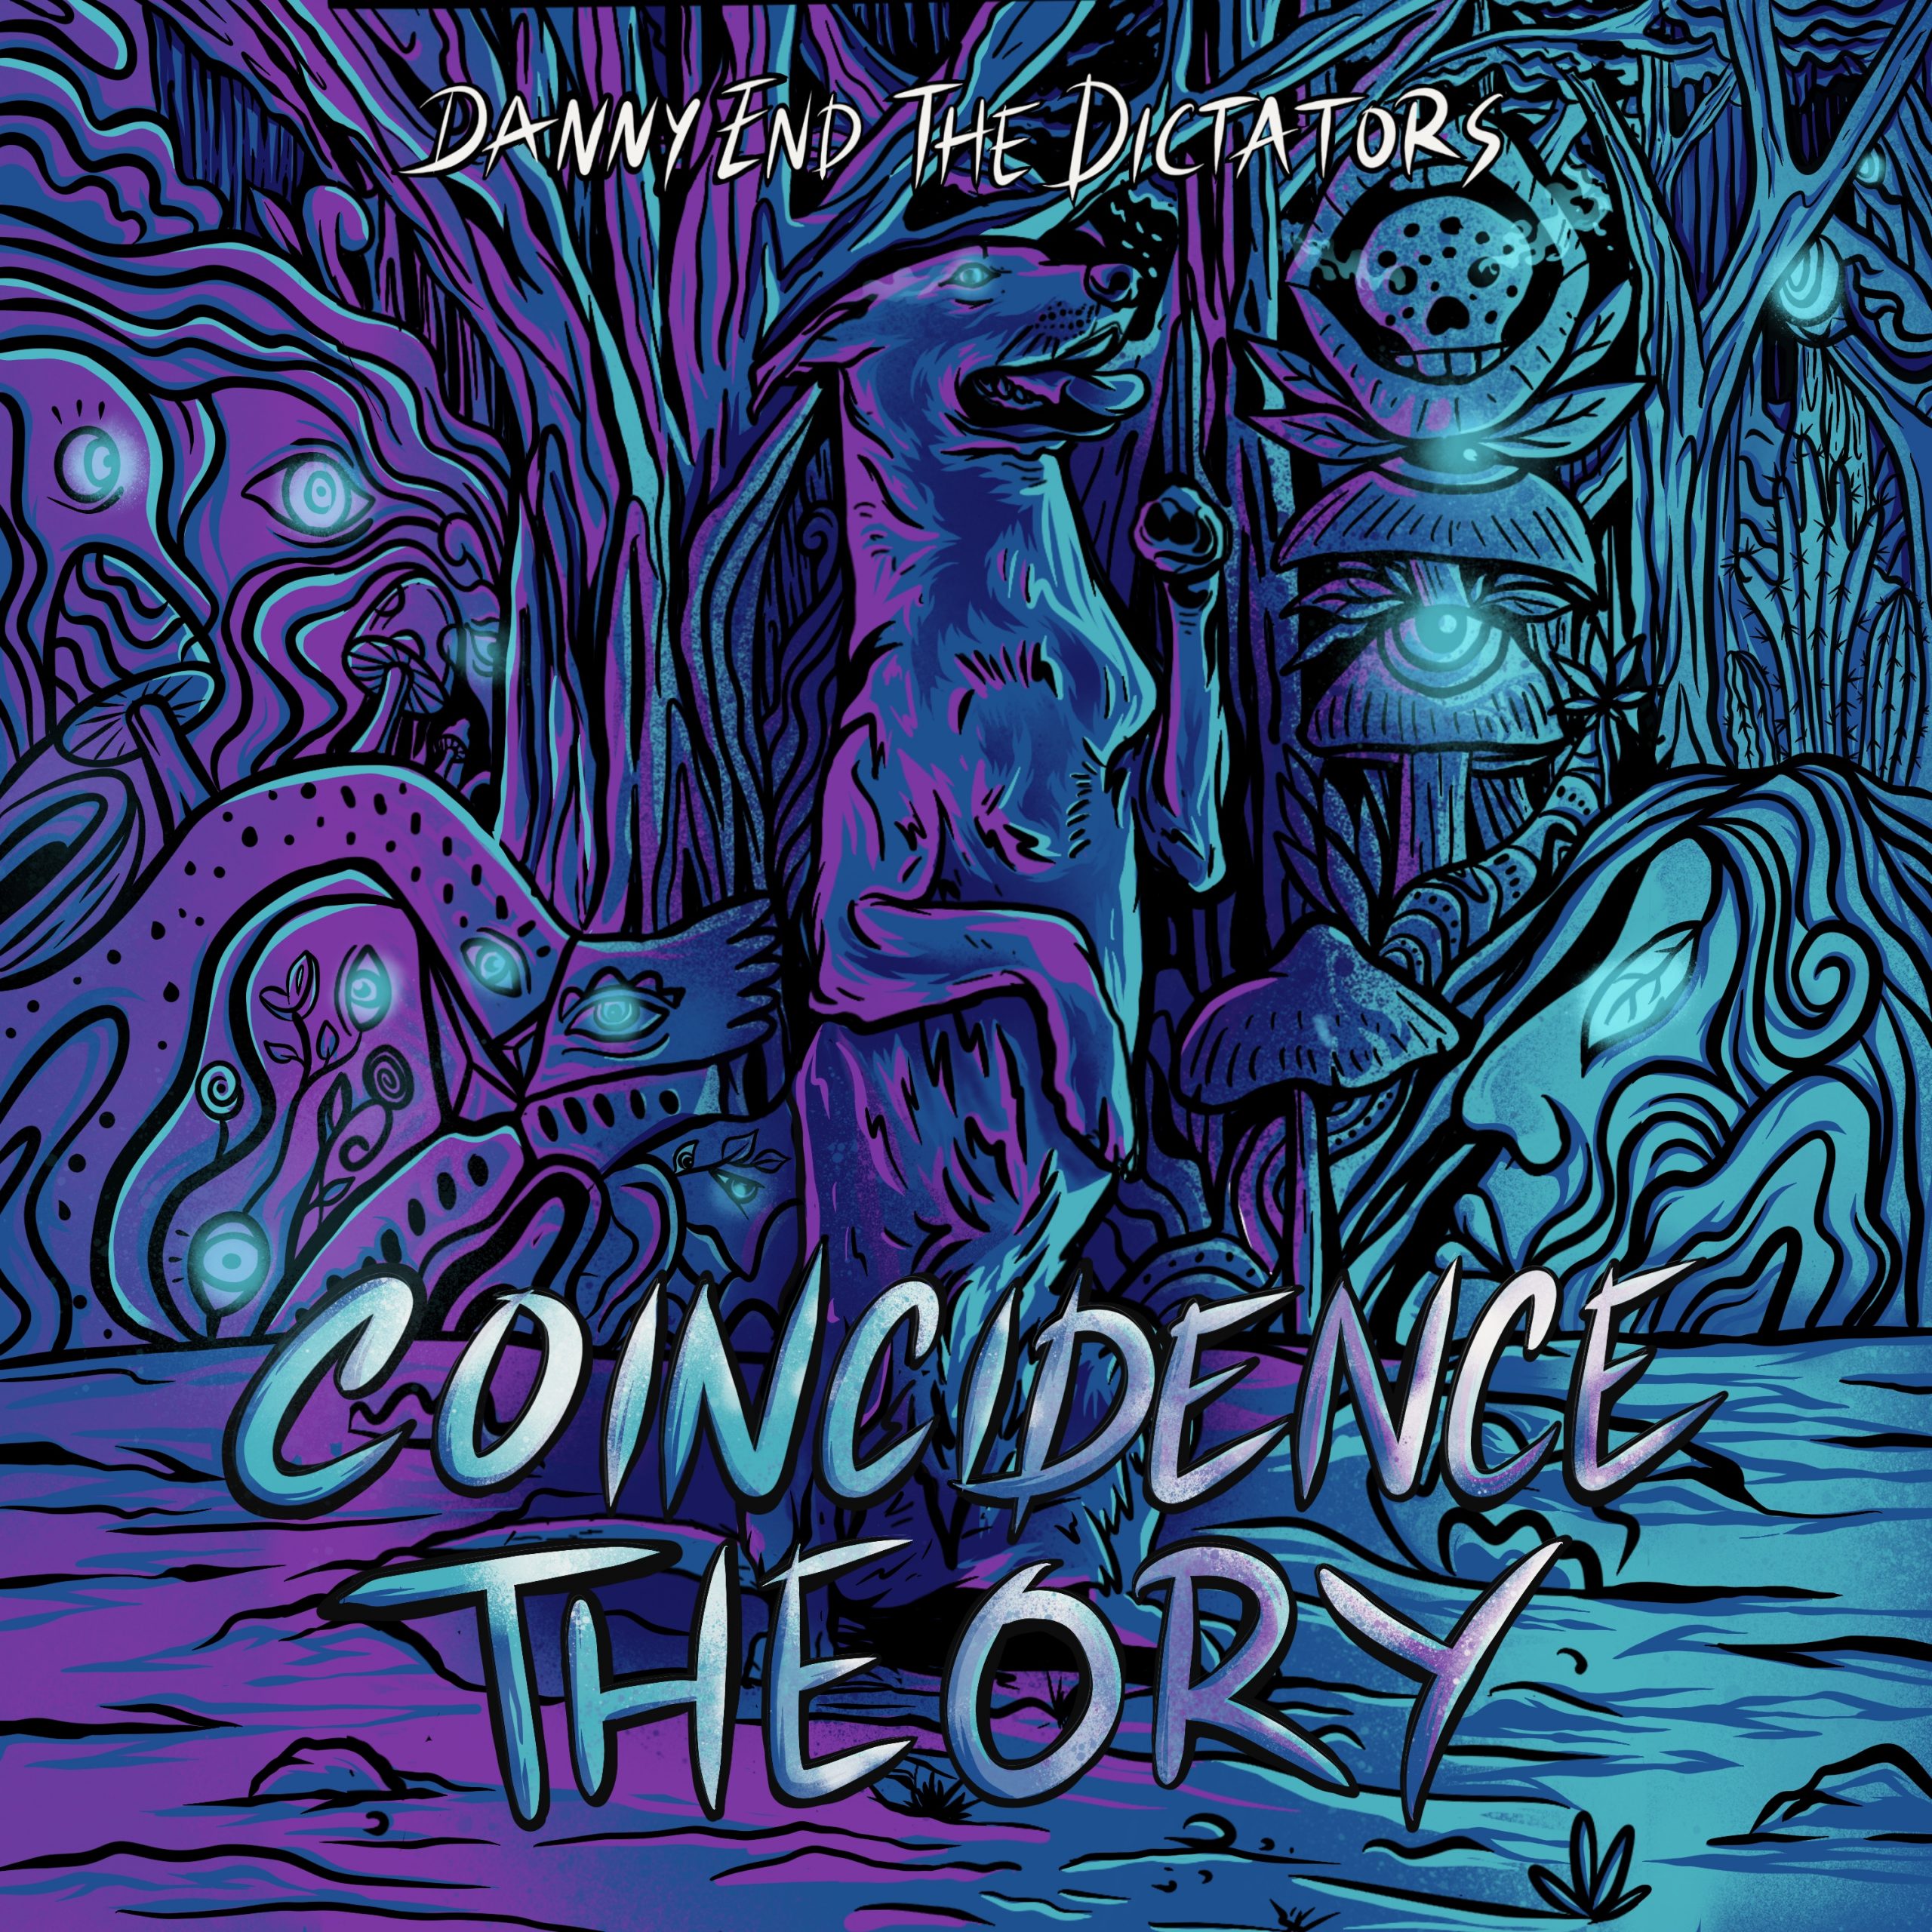 Review of “Coincidence Theory” by Danny End the Dictators